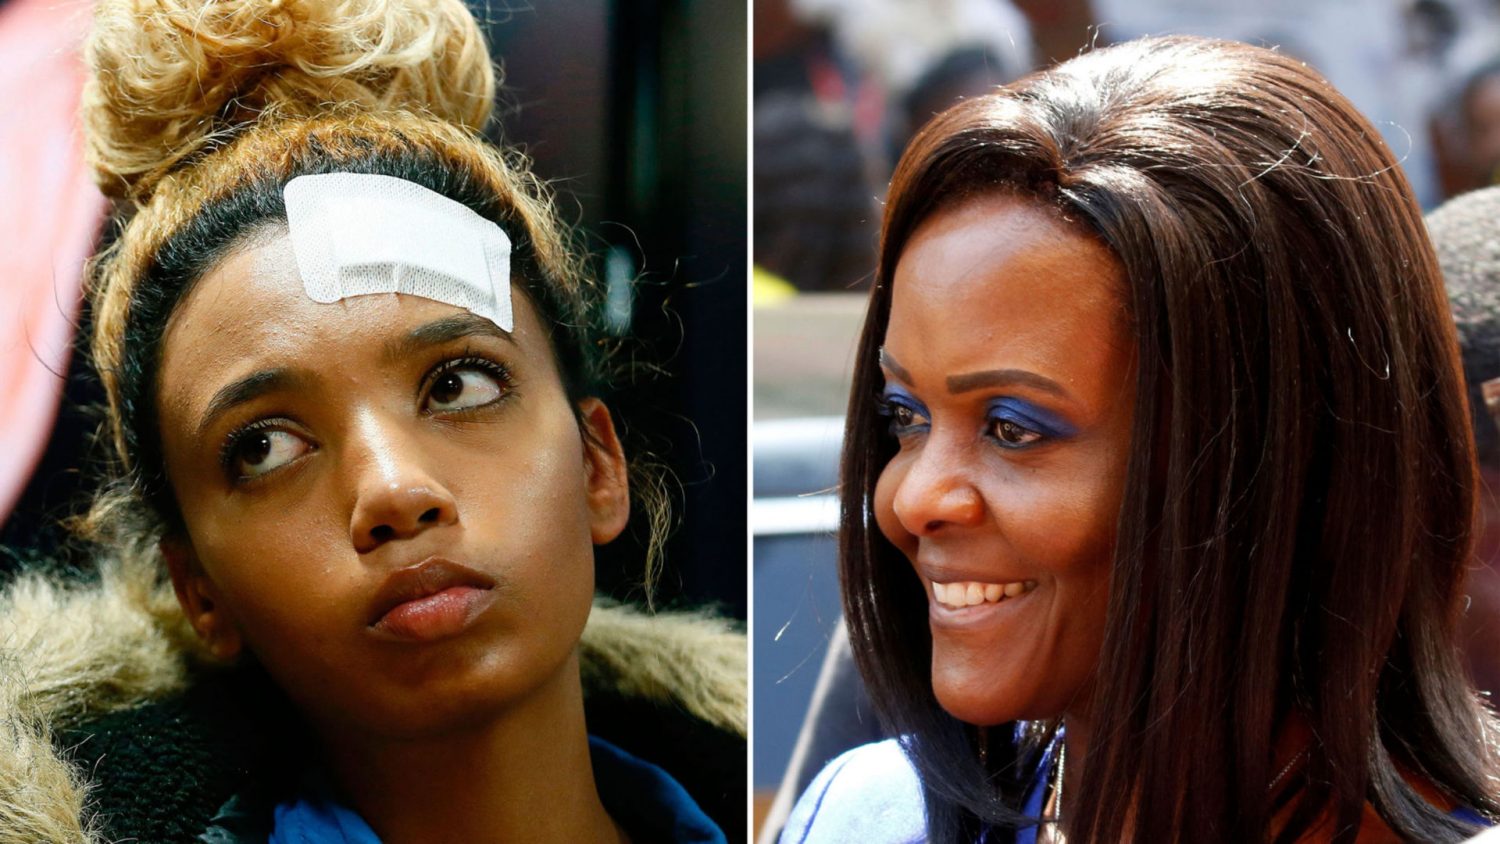 Grace Mugabe (R) accuses Gabriella Engels of attacking her with a knife

